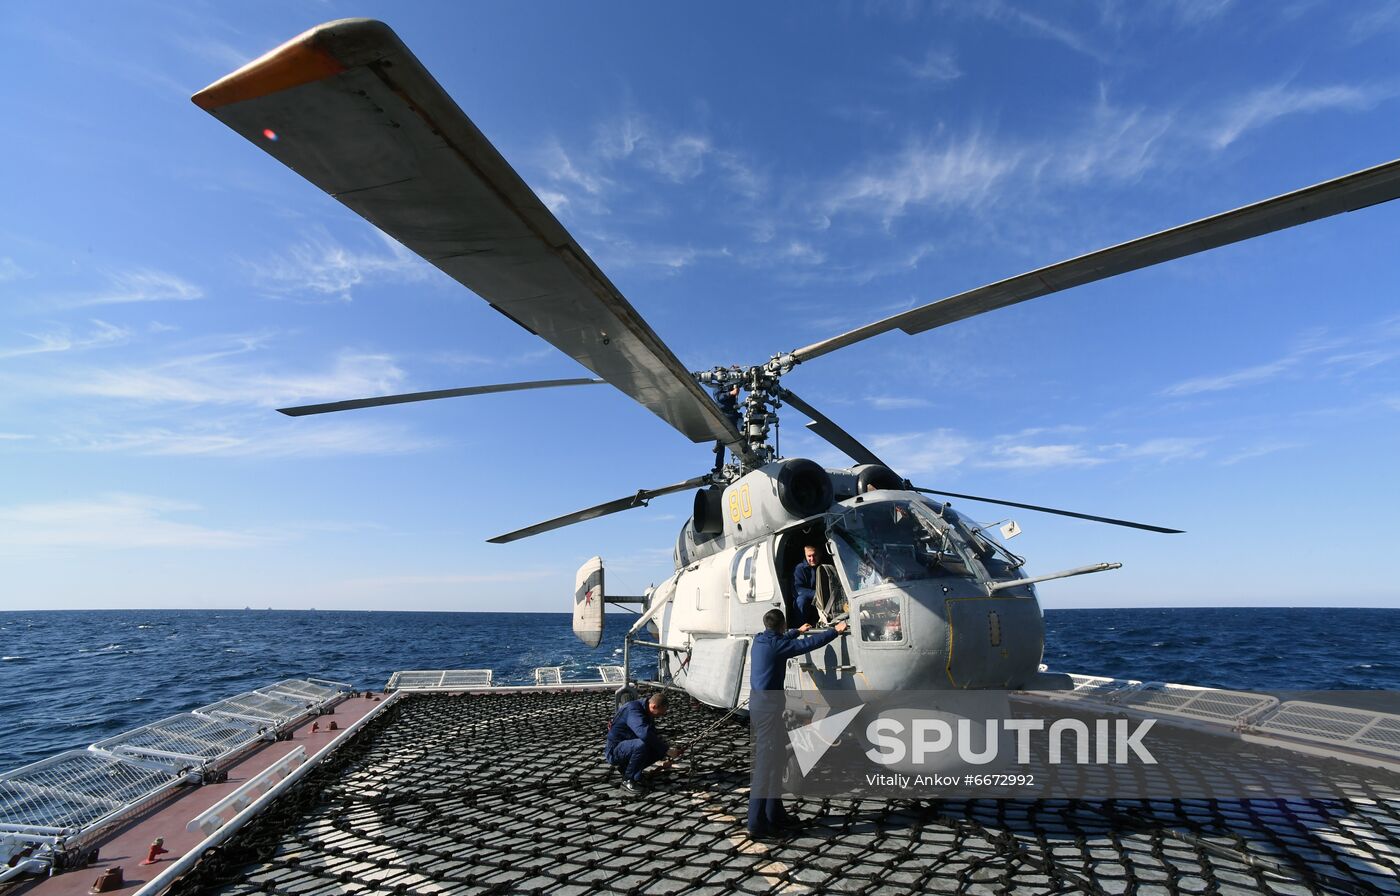 Russia China Joint Naval Drills